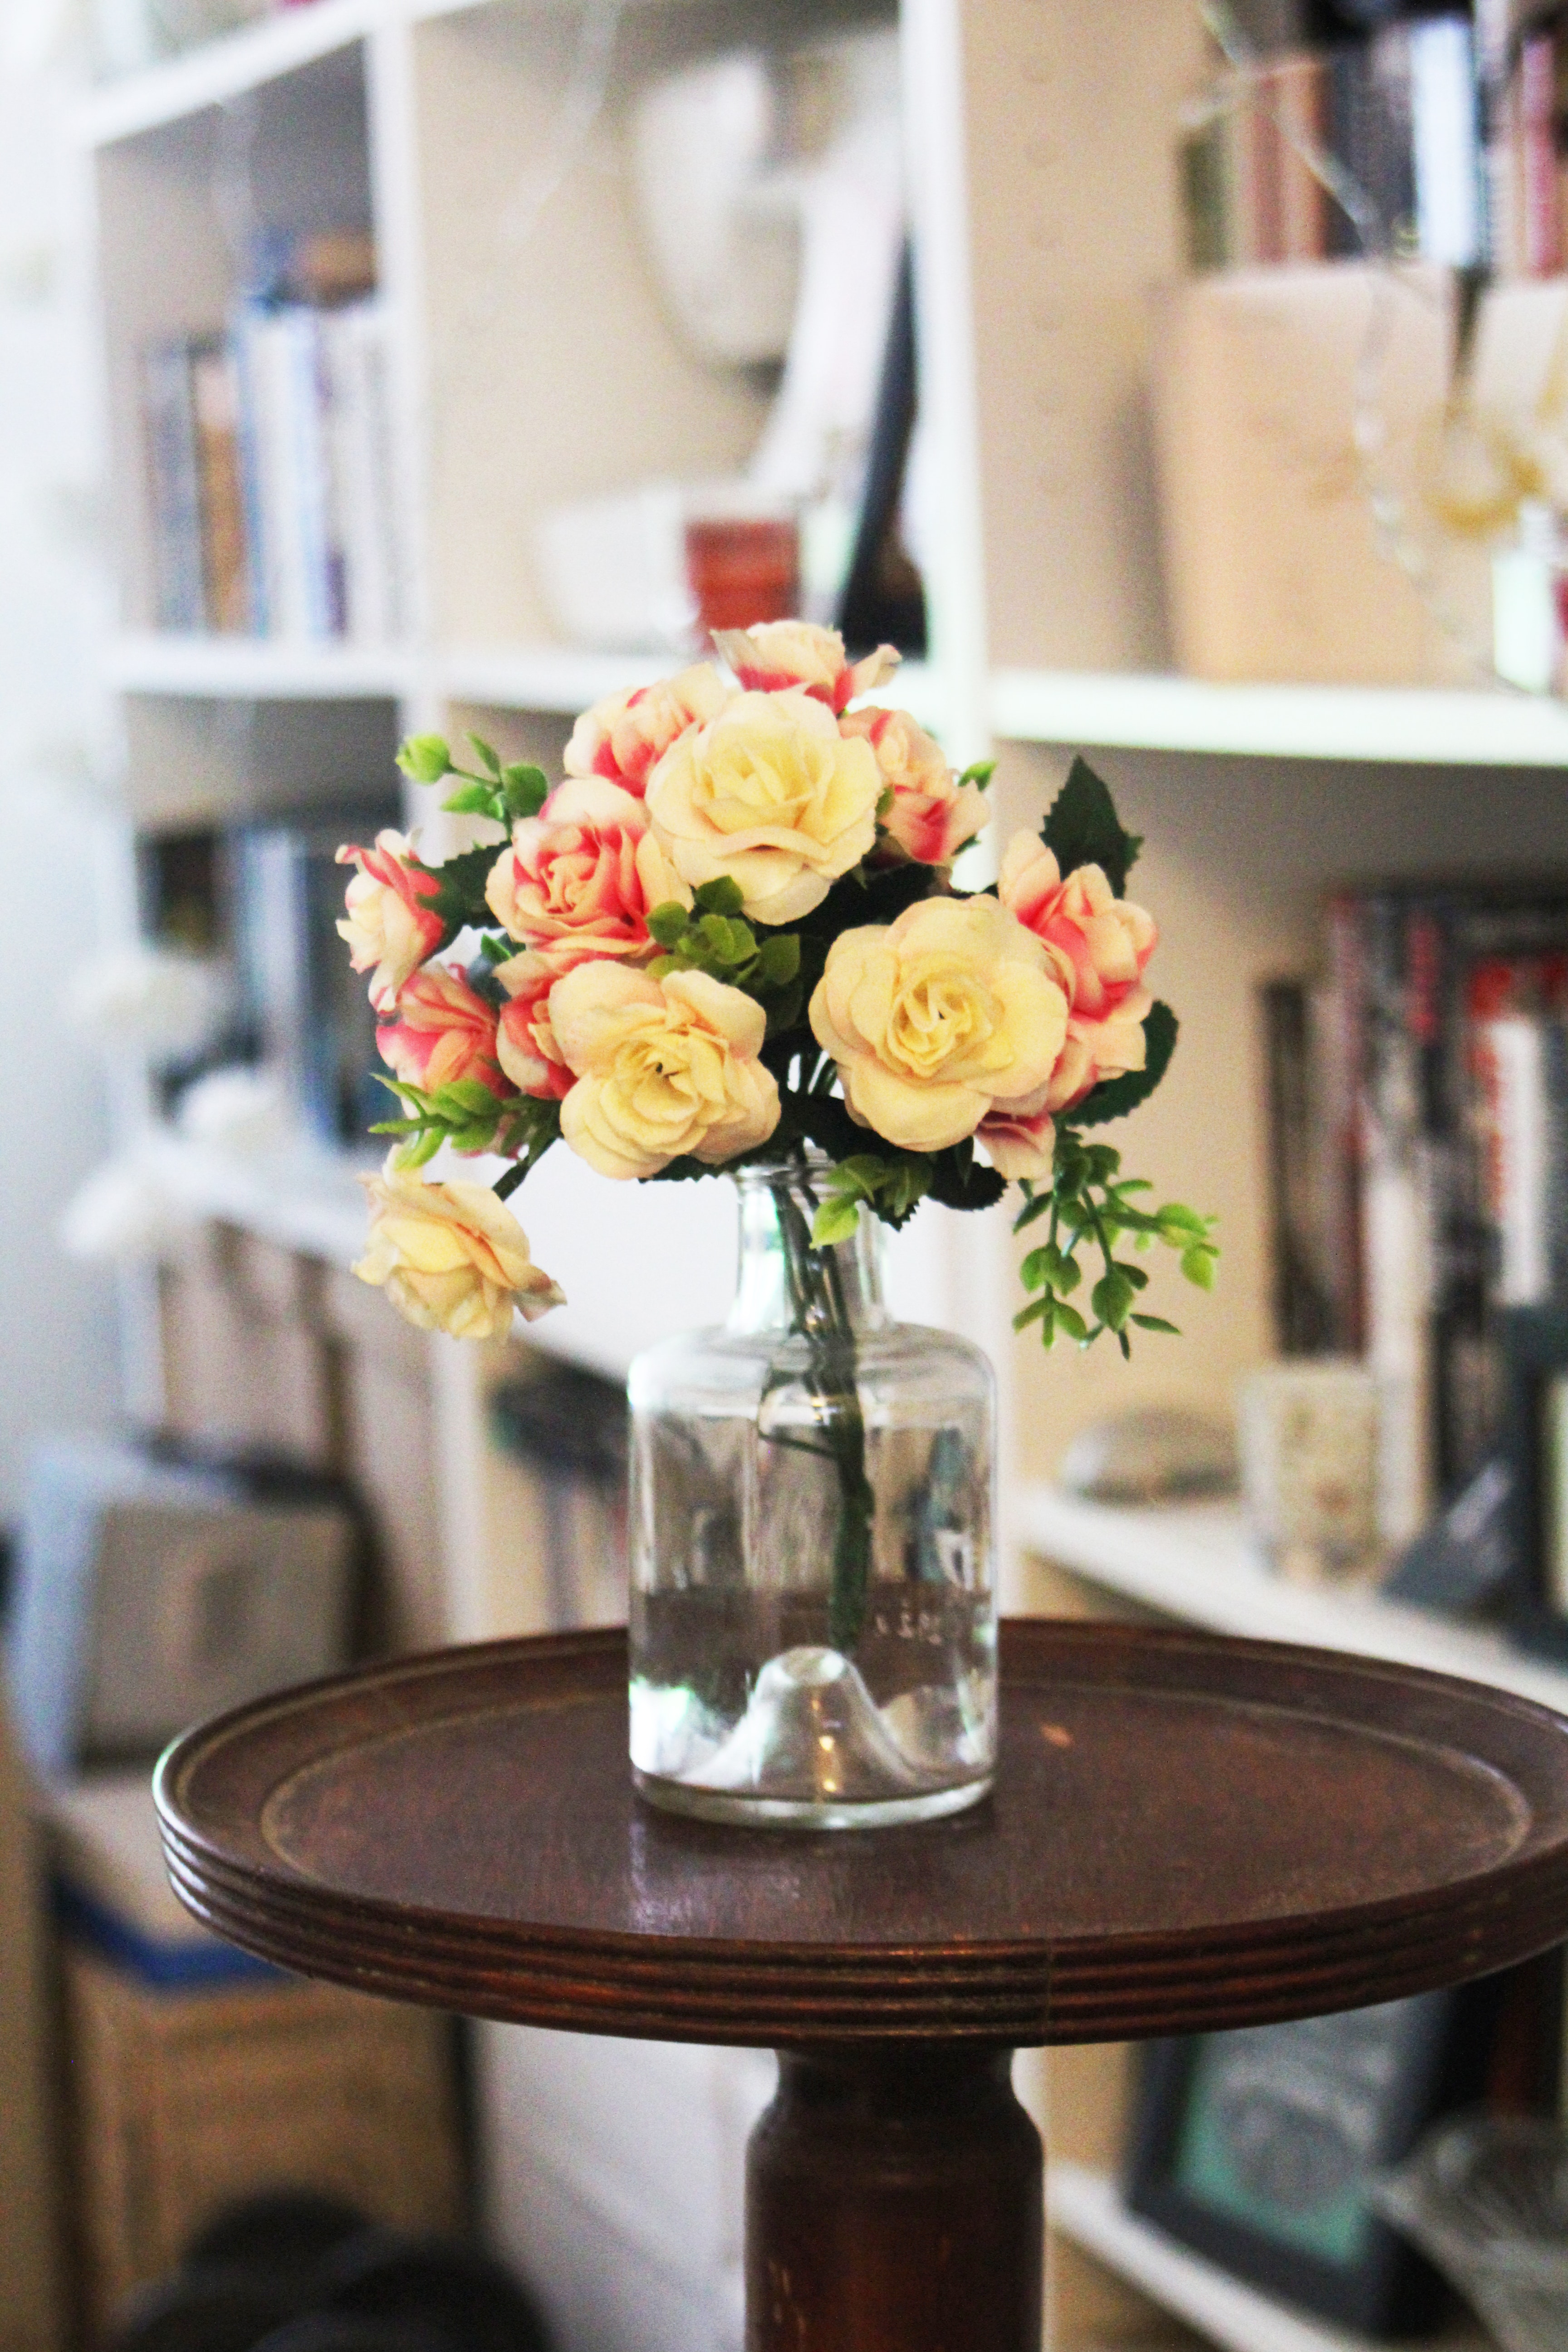 Arrange of petal flower in clear glass vase at table photo